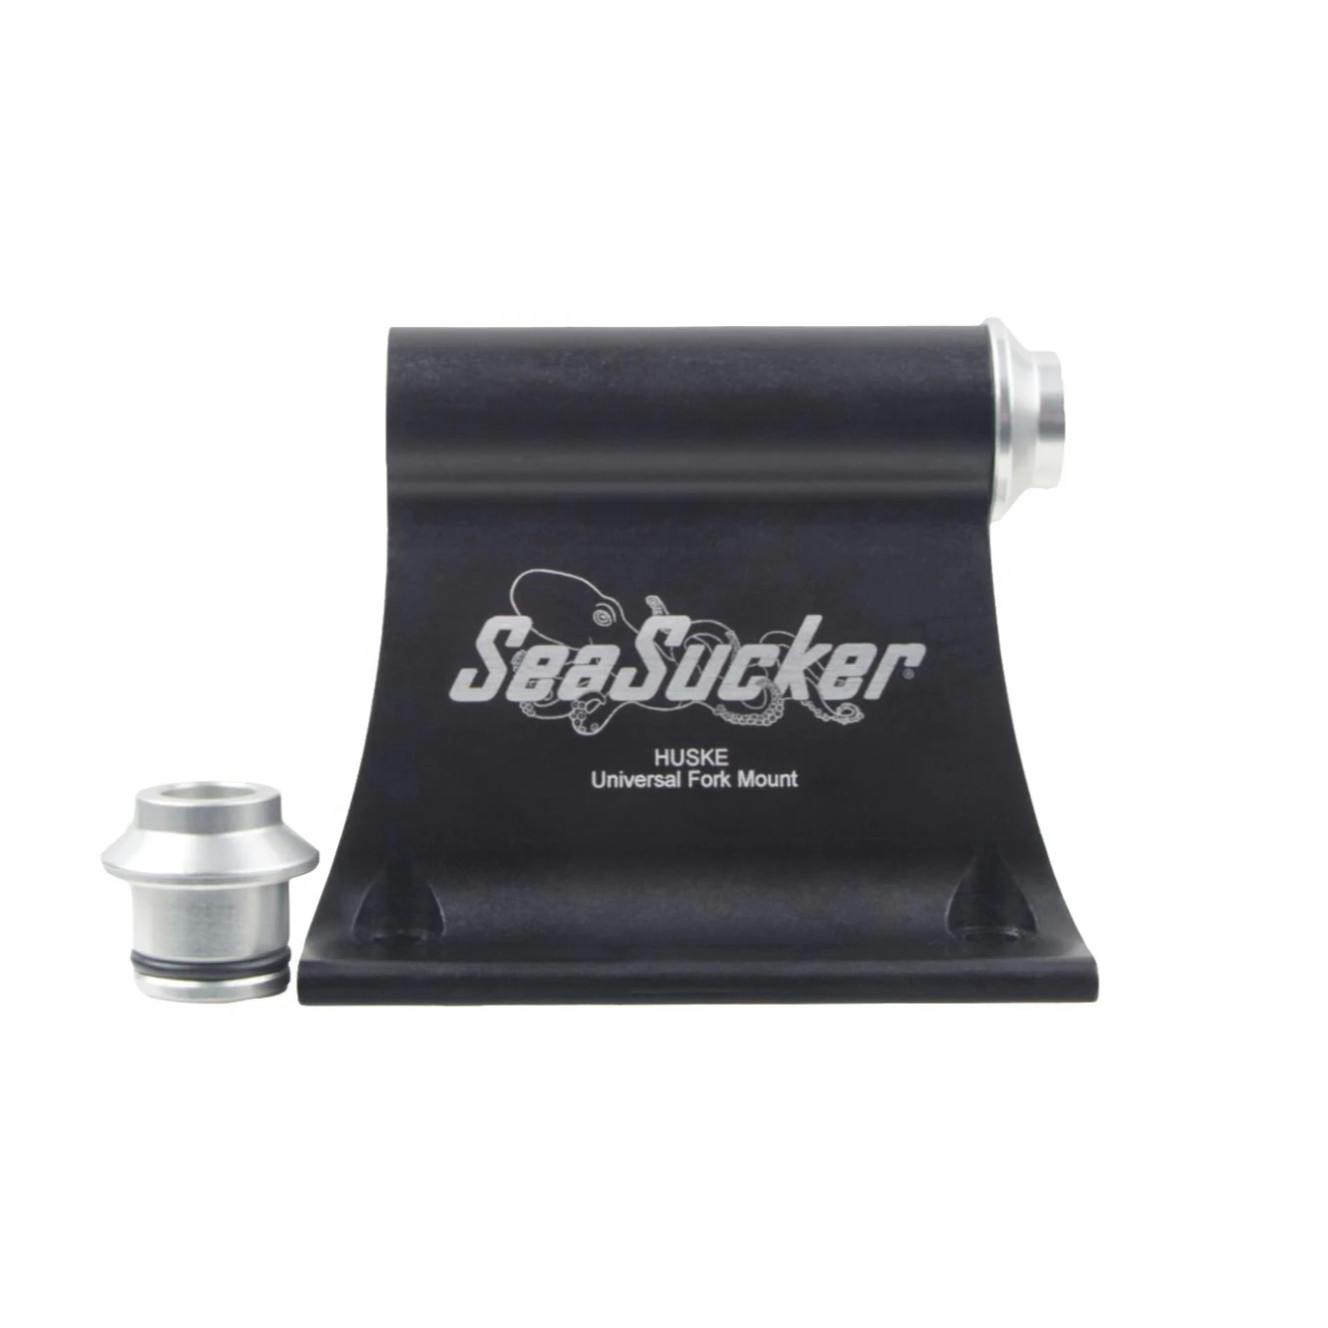 SeaSucker Fork Mount Body with 10x100 plugs inserted on white background